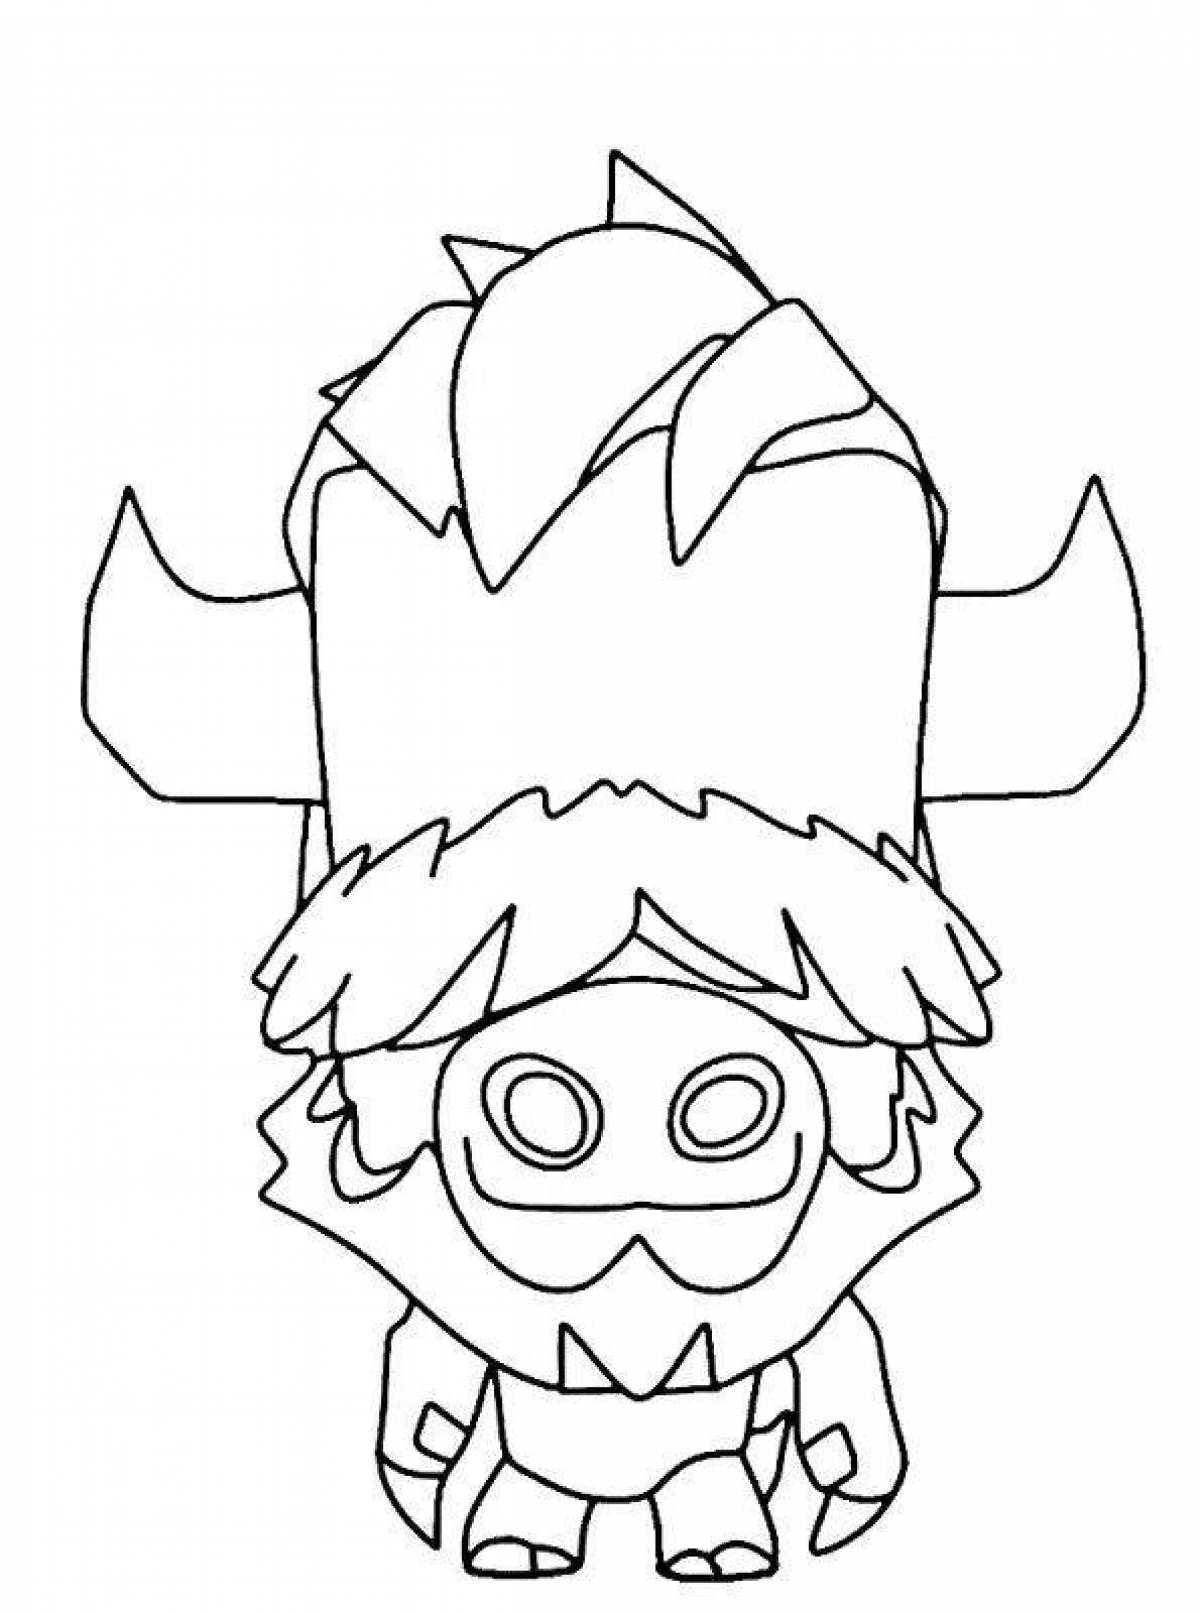 Glimmer teeth coloring page